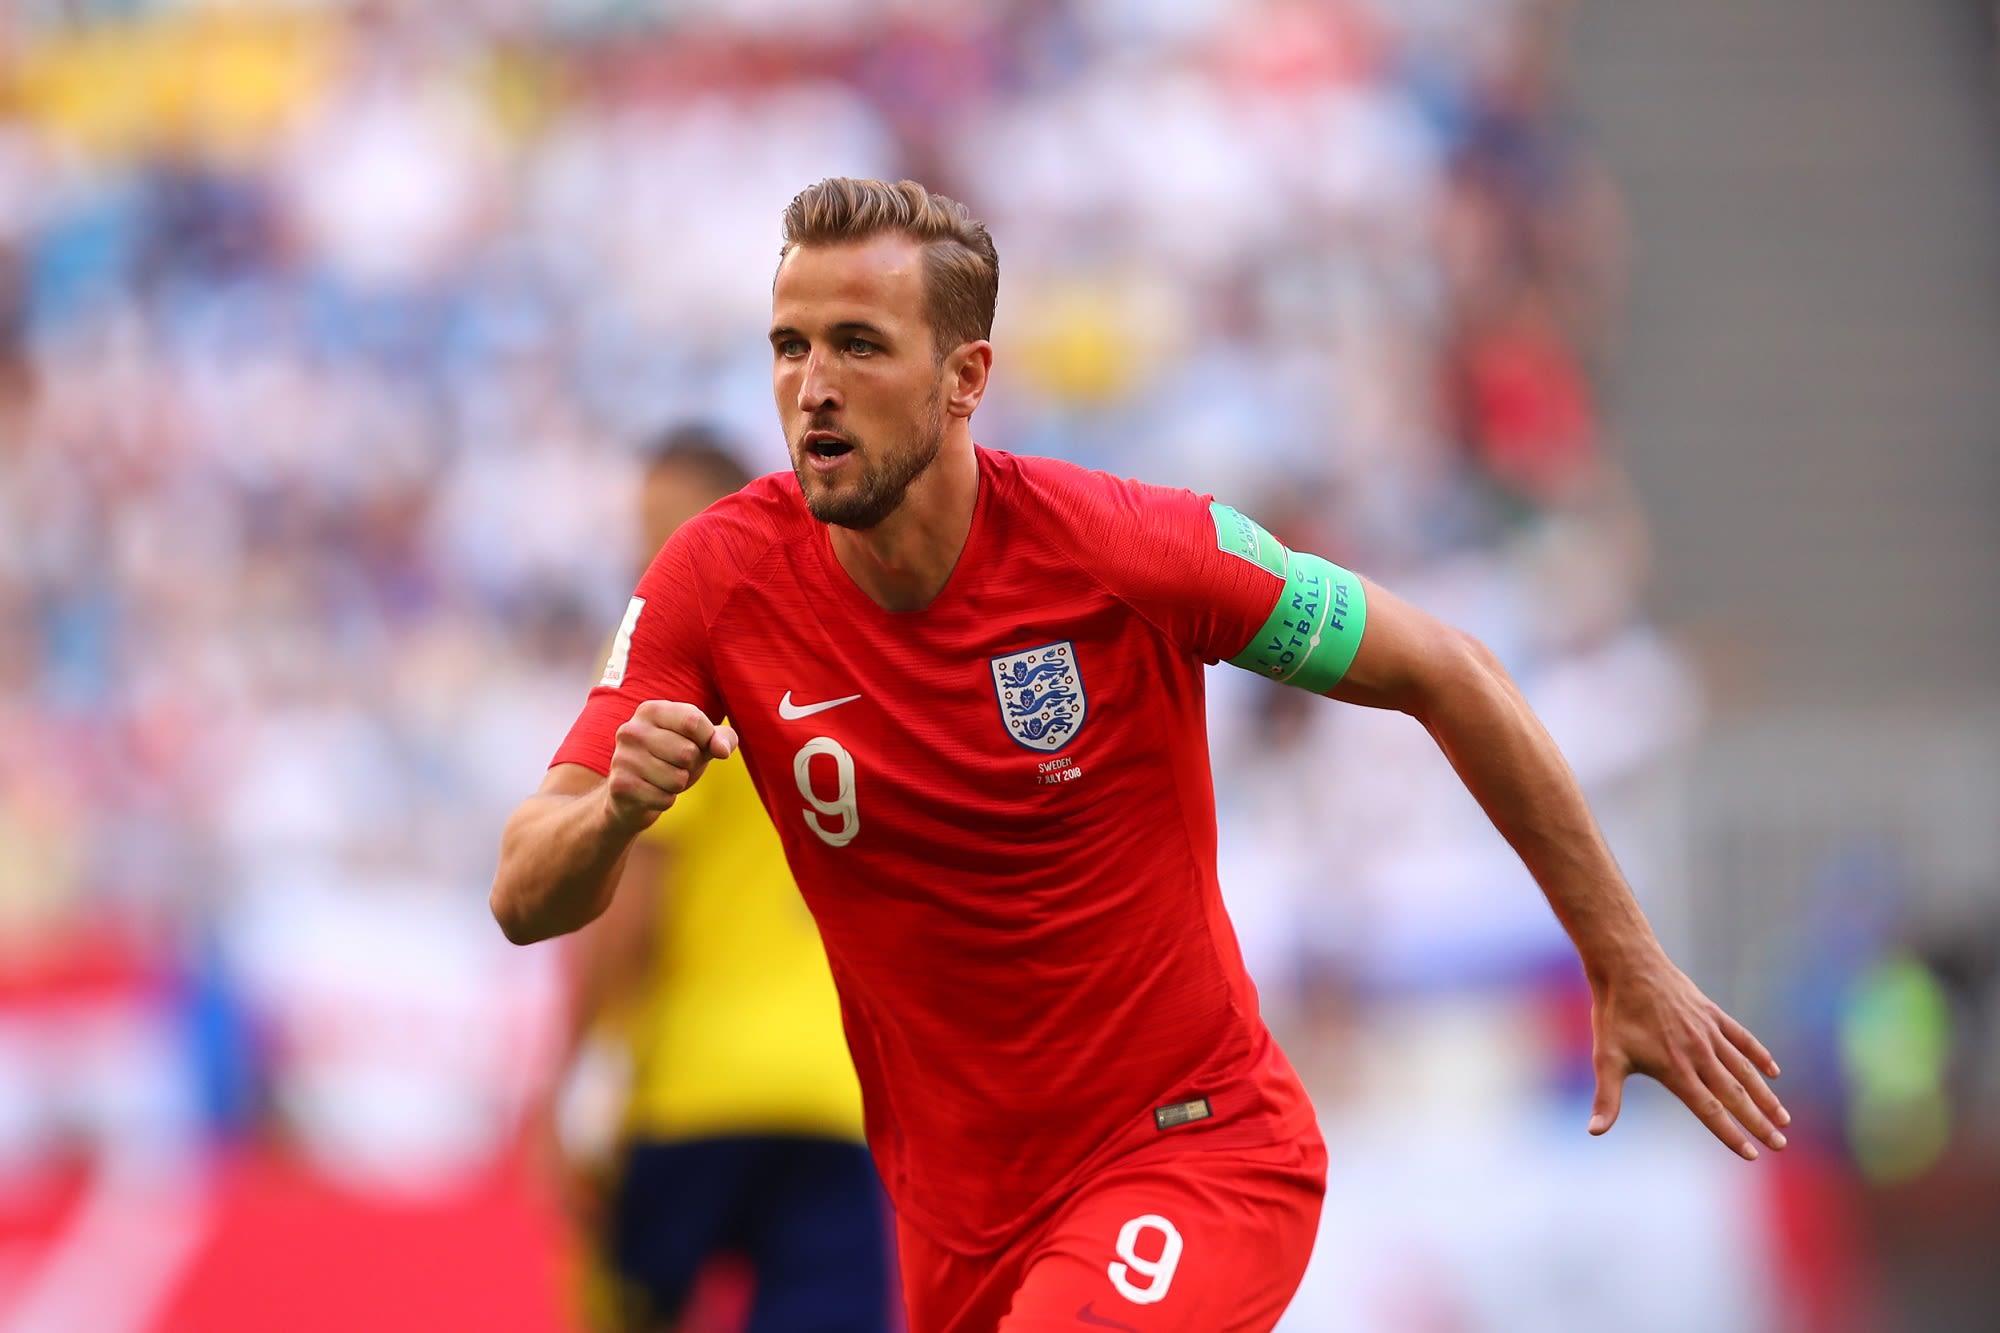 Here's How Much England's 24 Year Old Captain Harry Kane Earns